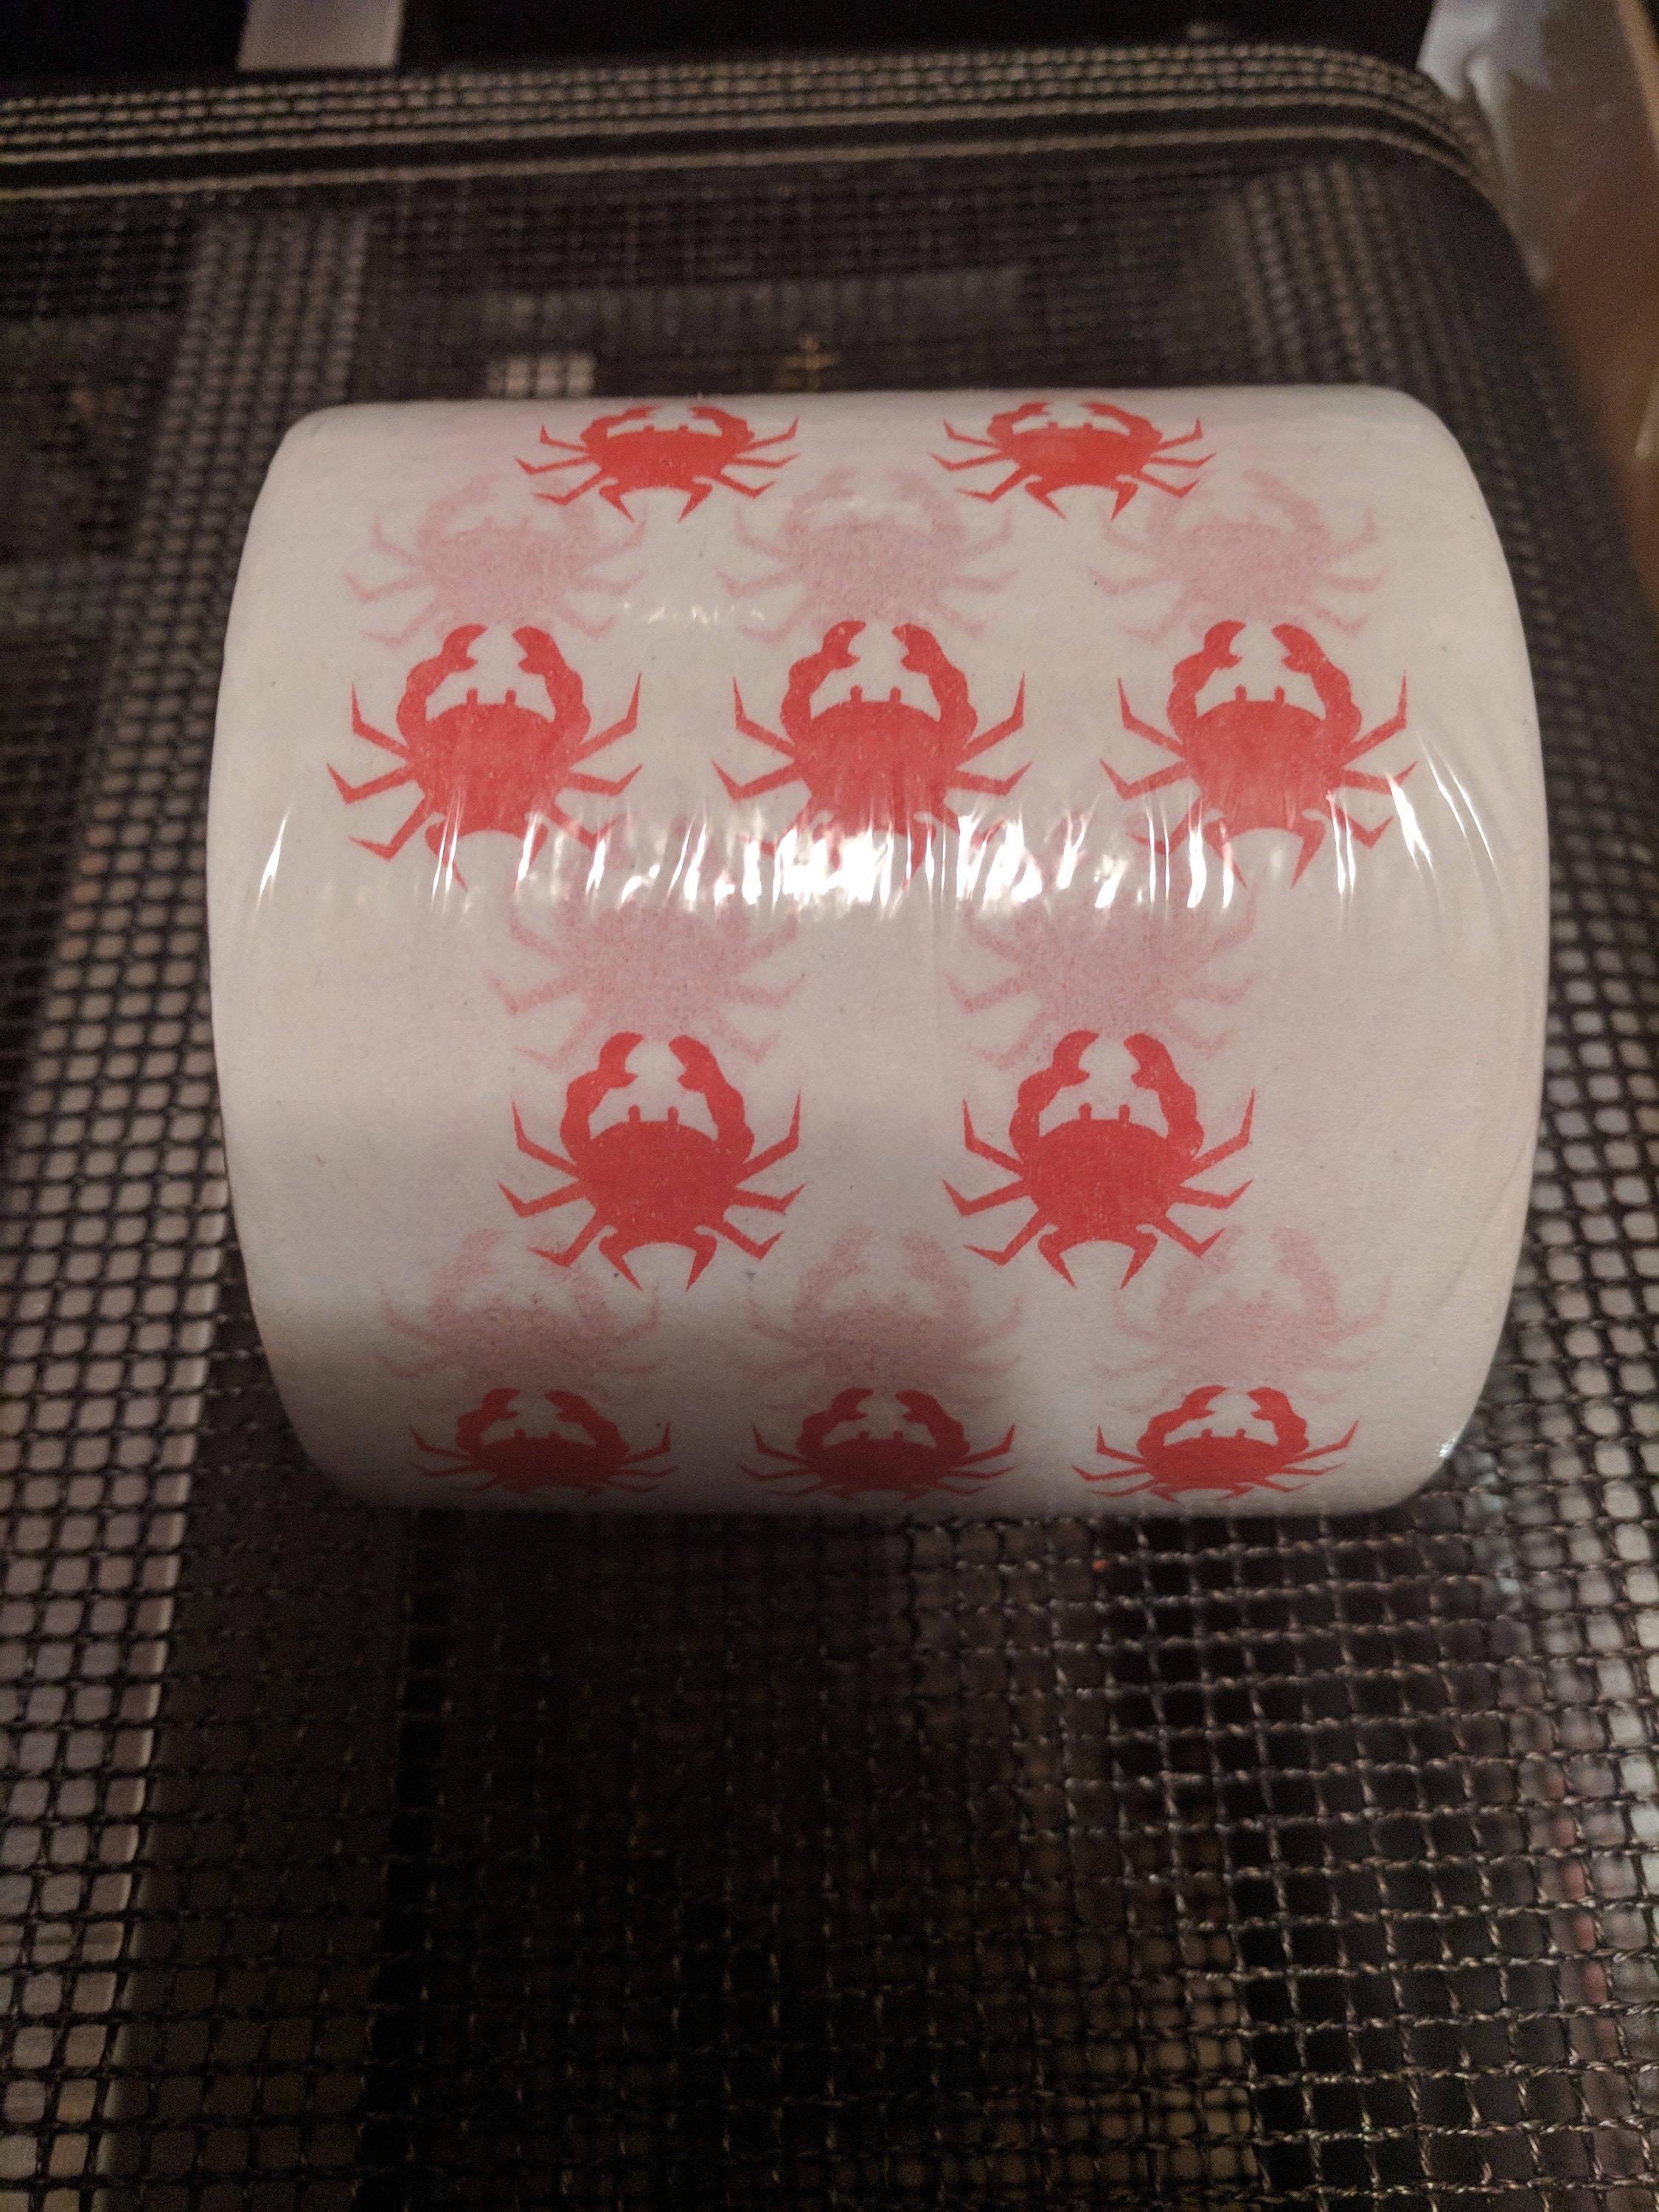 Crab Toilet Paper, Fun Novelty Seafood Design On These Rolls, Repeated Red Crab Imprint White Toilet Paper